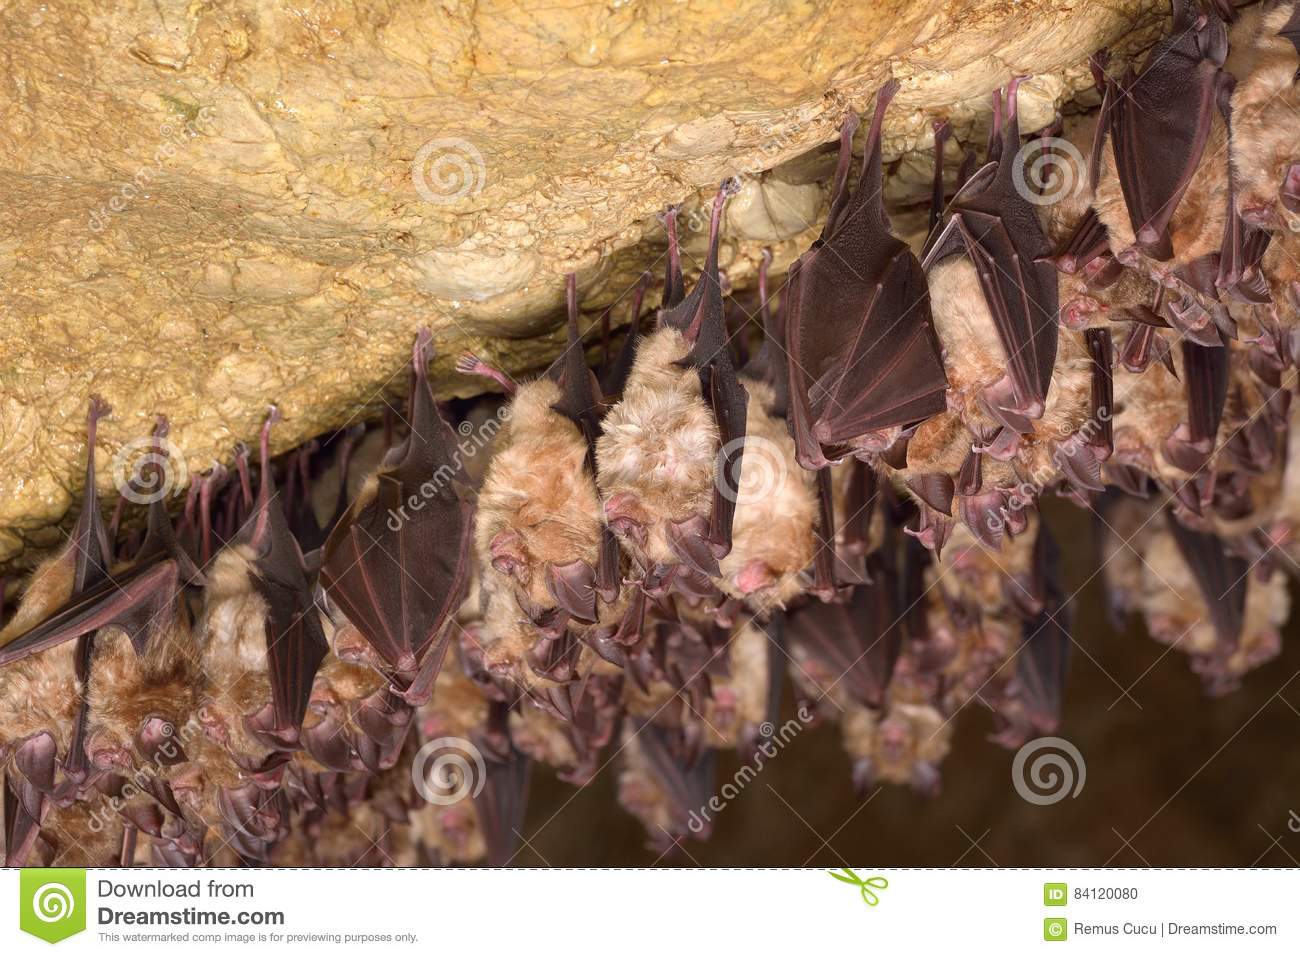 Groups Of Sleeping Bats In Cave.